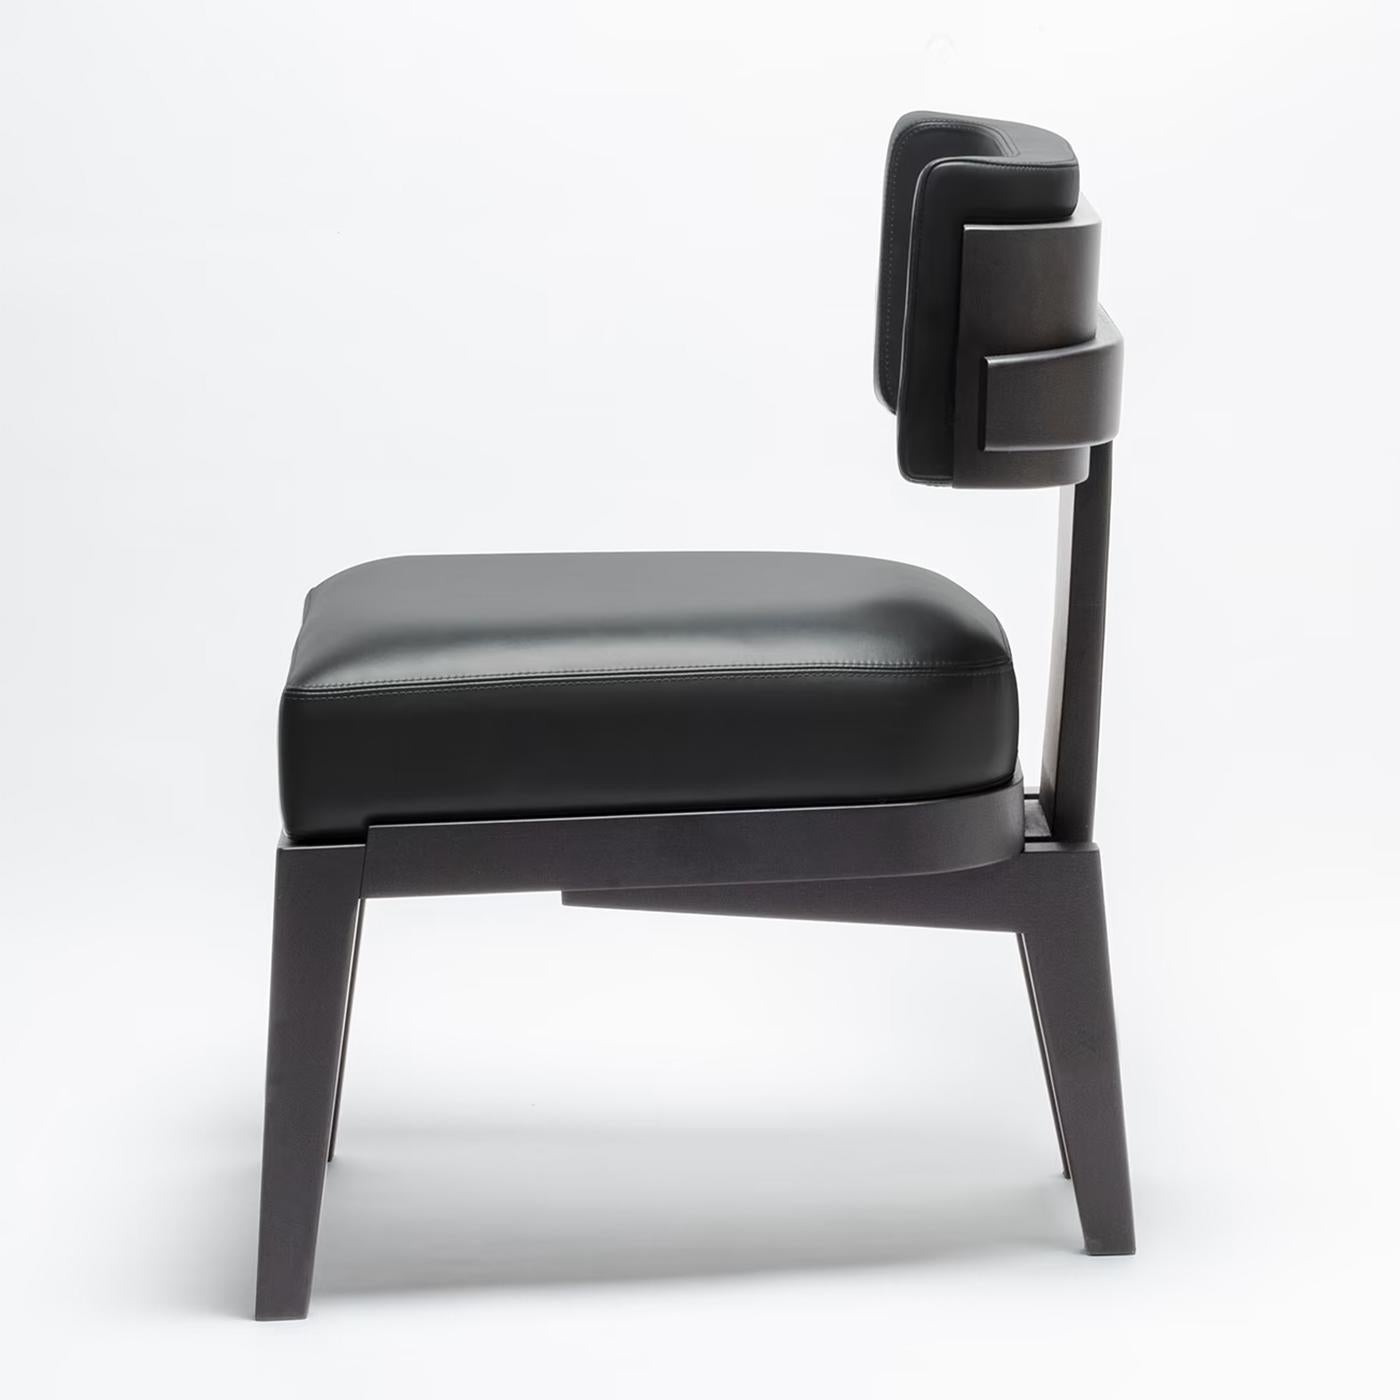 Chair eloise black with solid wood structure in stained.
Wenge finish, upholstered and covered with high quality. 
Genuine black leather.